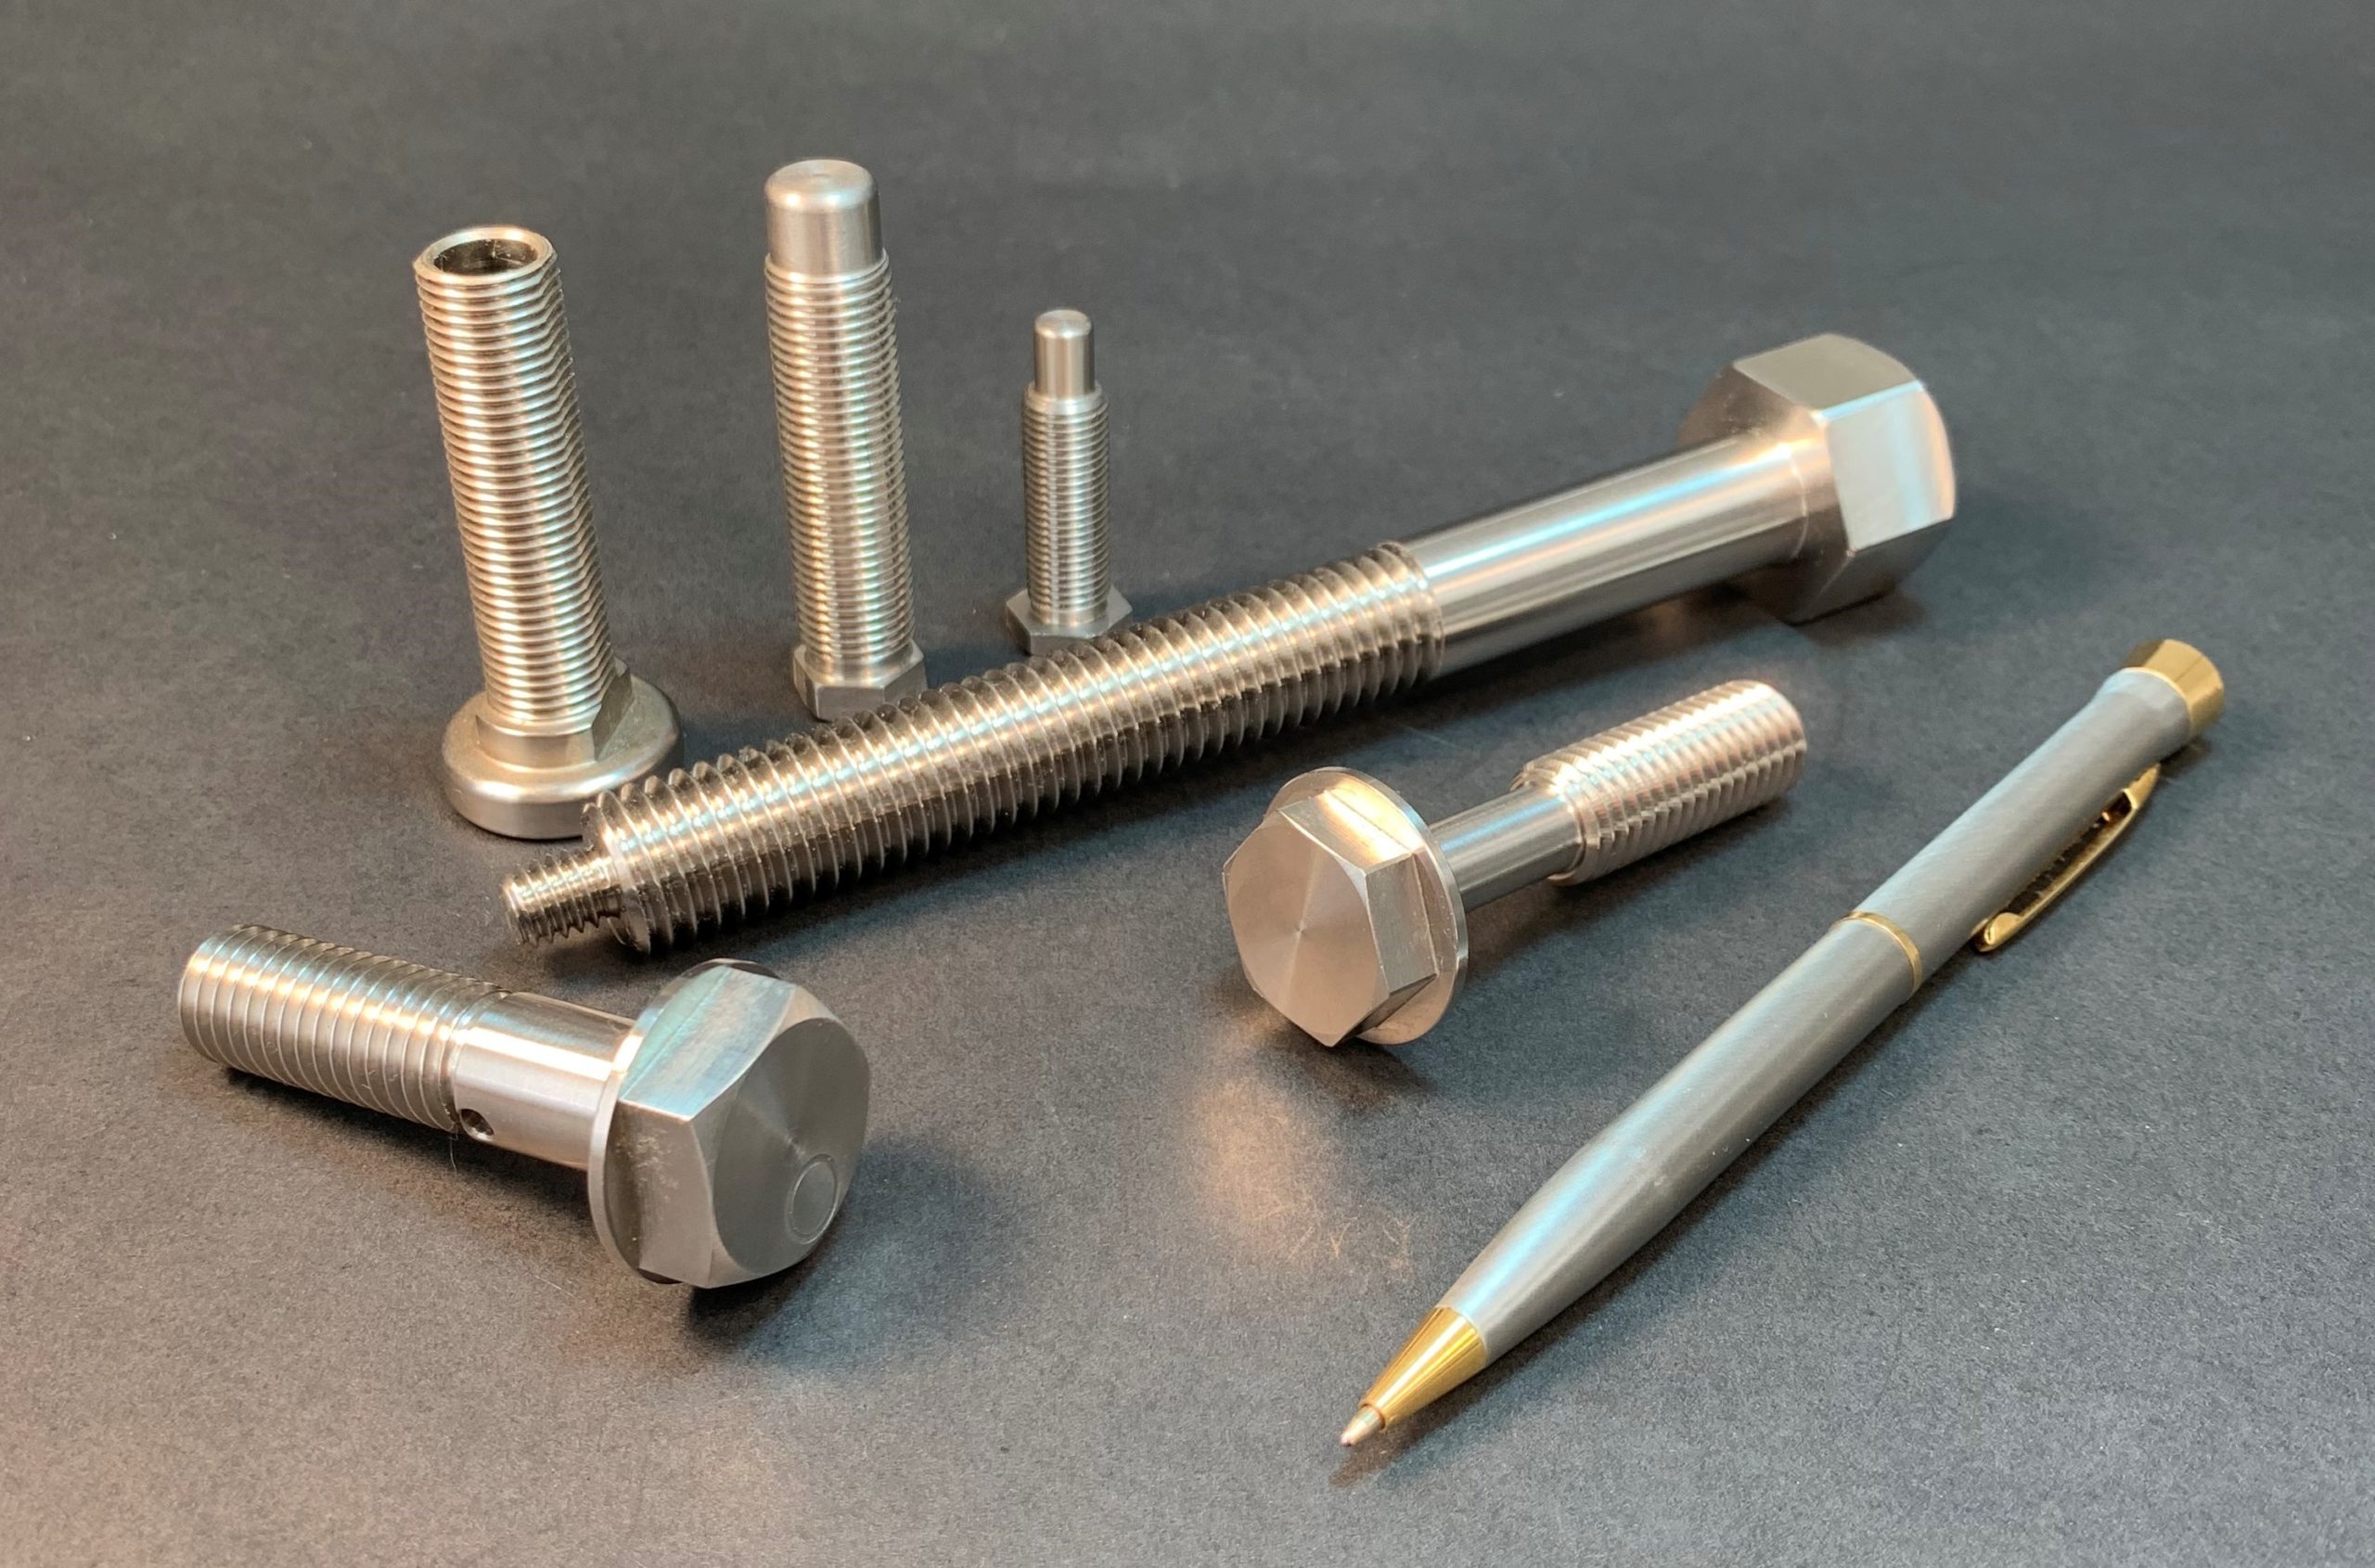 Custom Stainless Steel Bolts and Screws manufactured with Metric, British, or custom thread Materials.